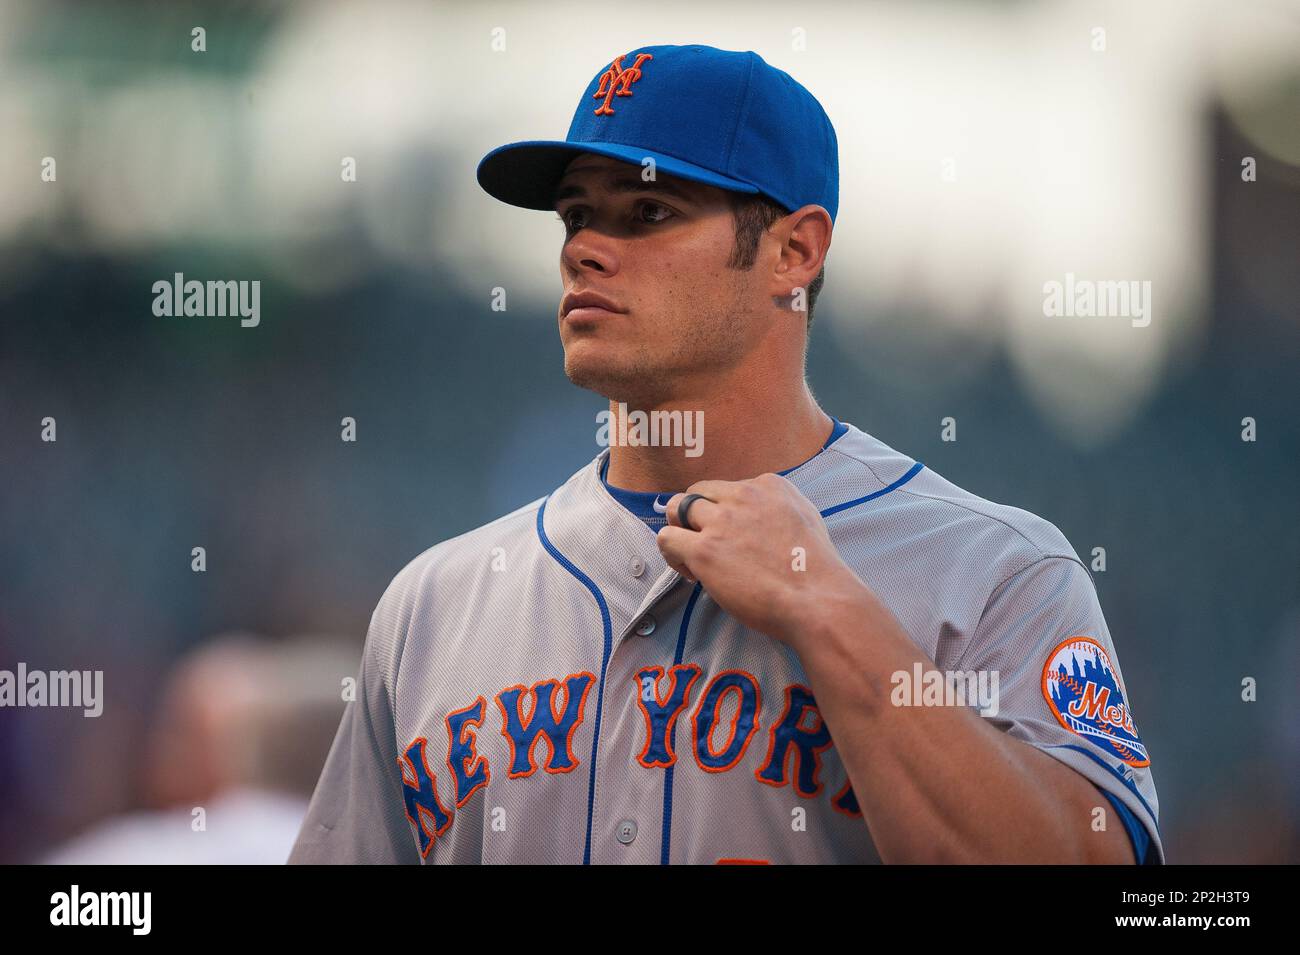 21 AUGUST 2015: New York Mets catcher Anthony Recker (20) during a